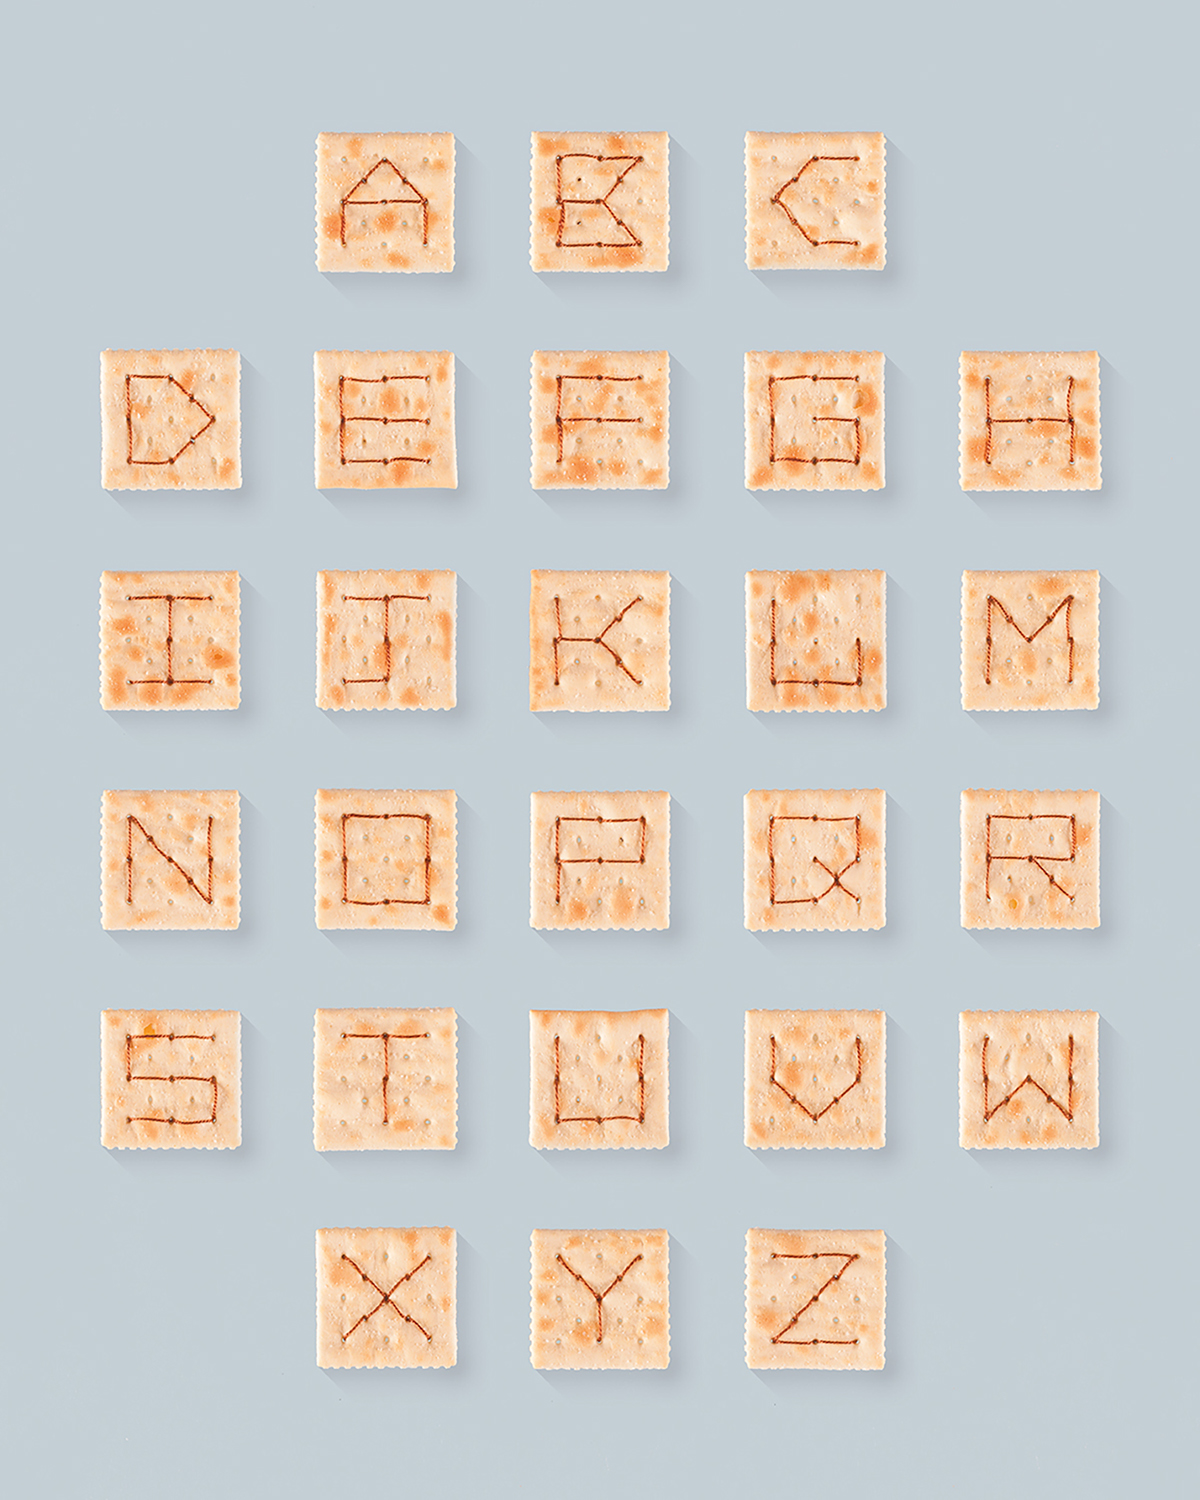 Typeface Nabisco Soup uppercase type experimental crackers Saltine Crackers play